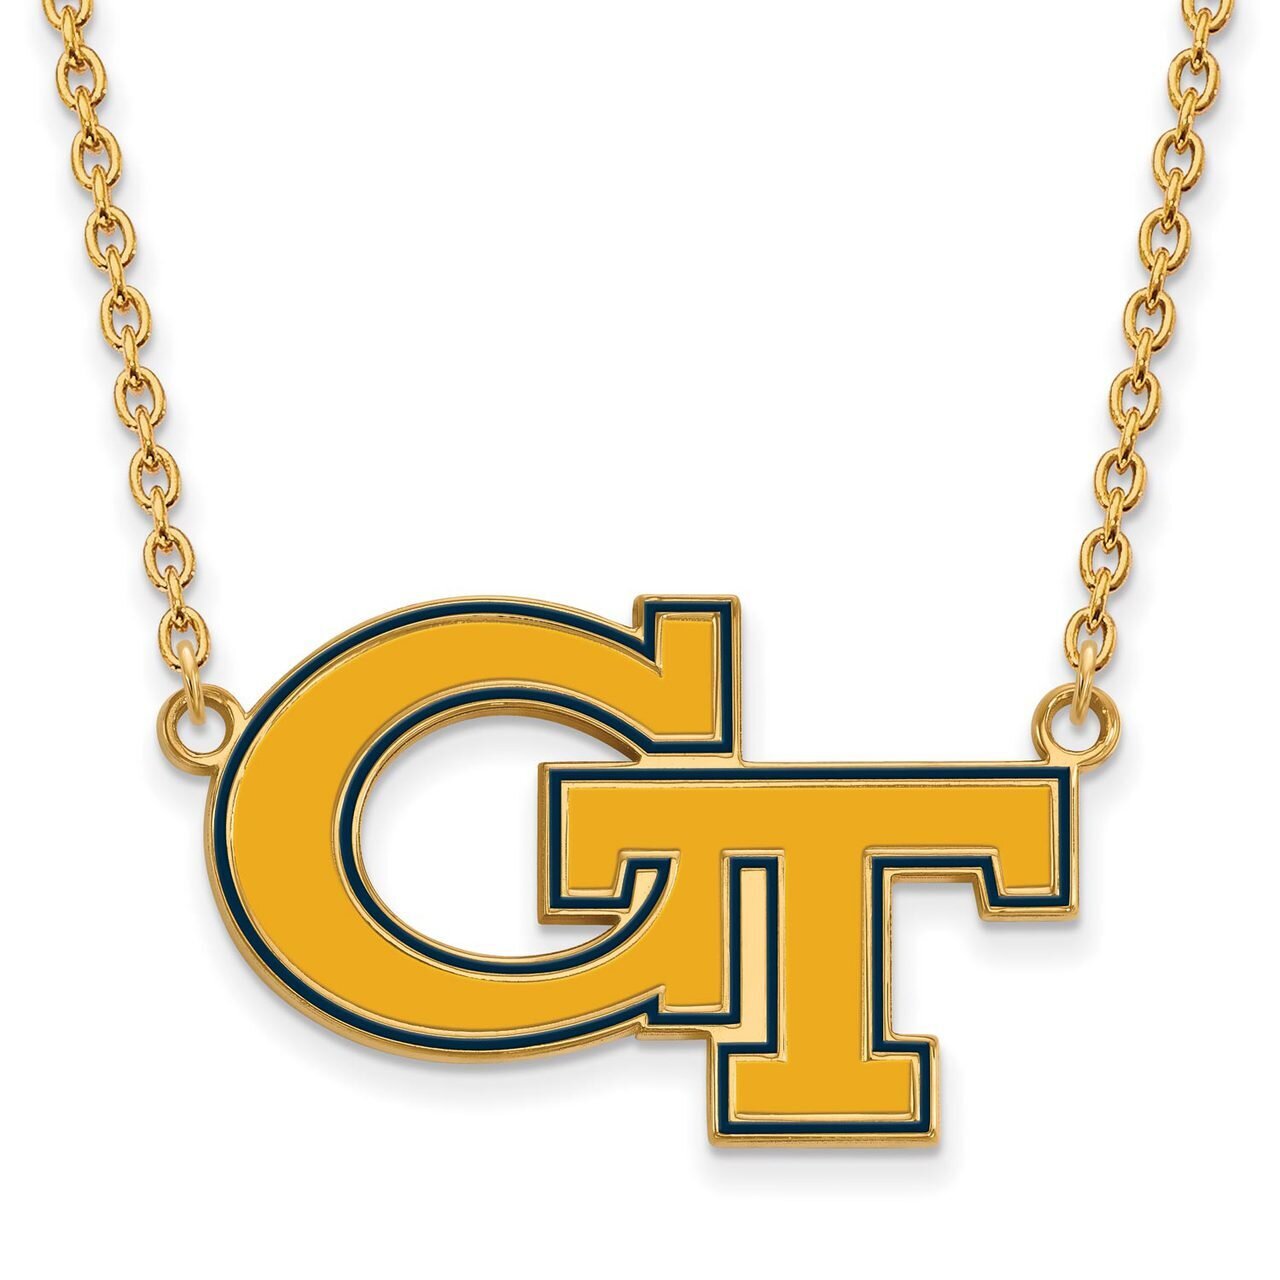 Georgia Institute of Technology Large Enamel Pendant with Chain Necklace Gold-plated Silver GP067GT-18